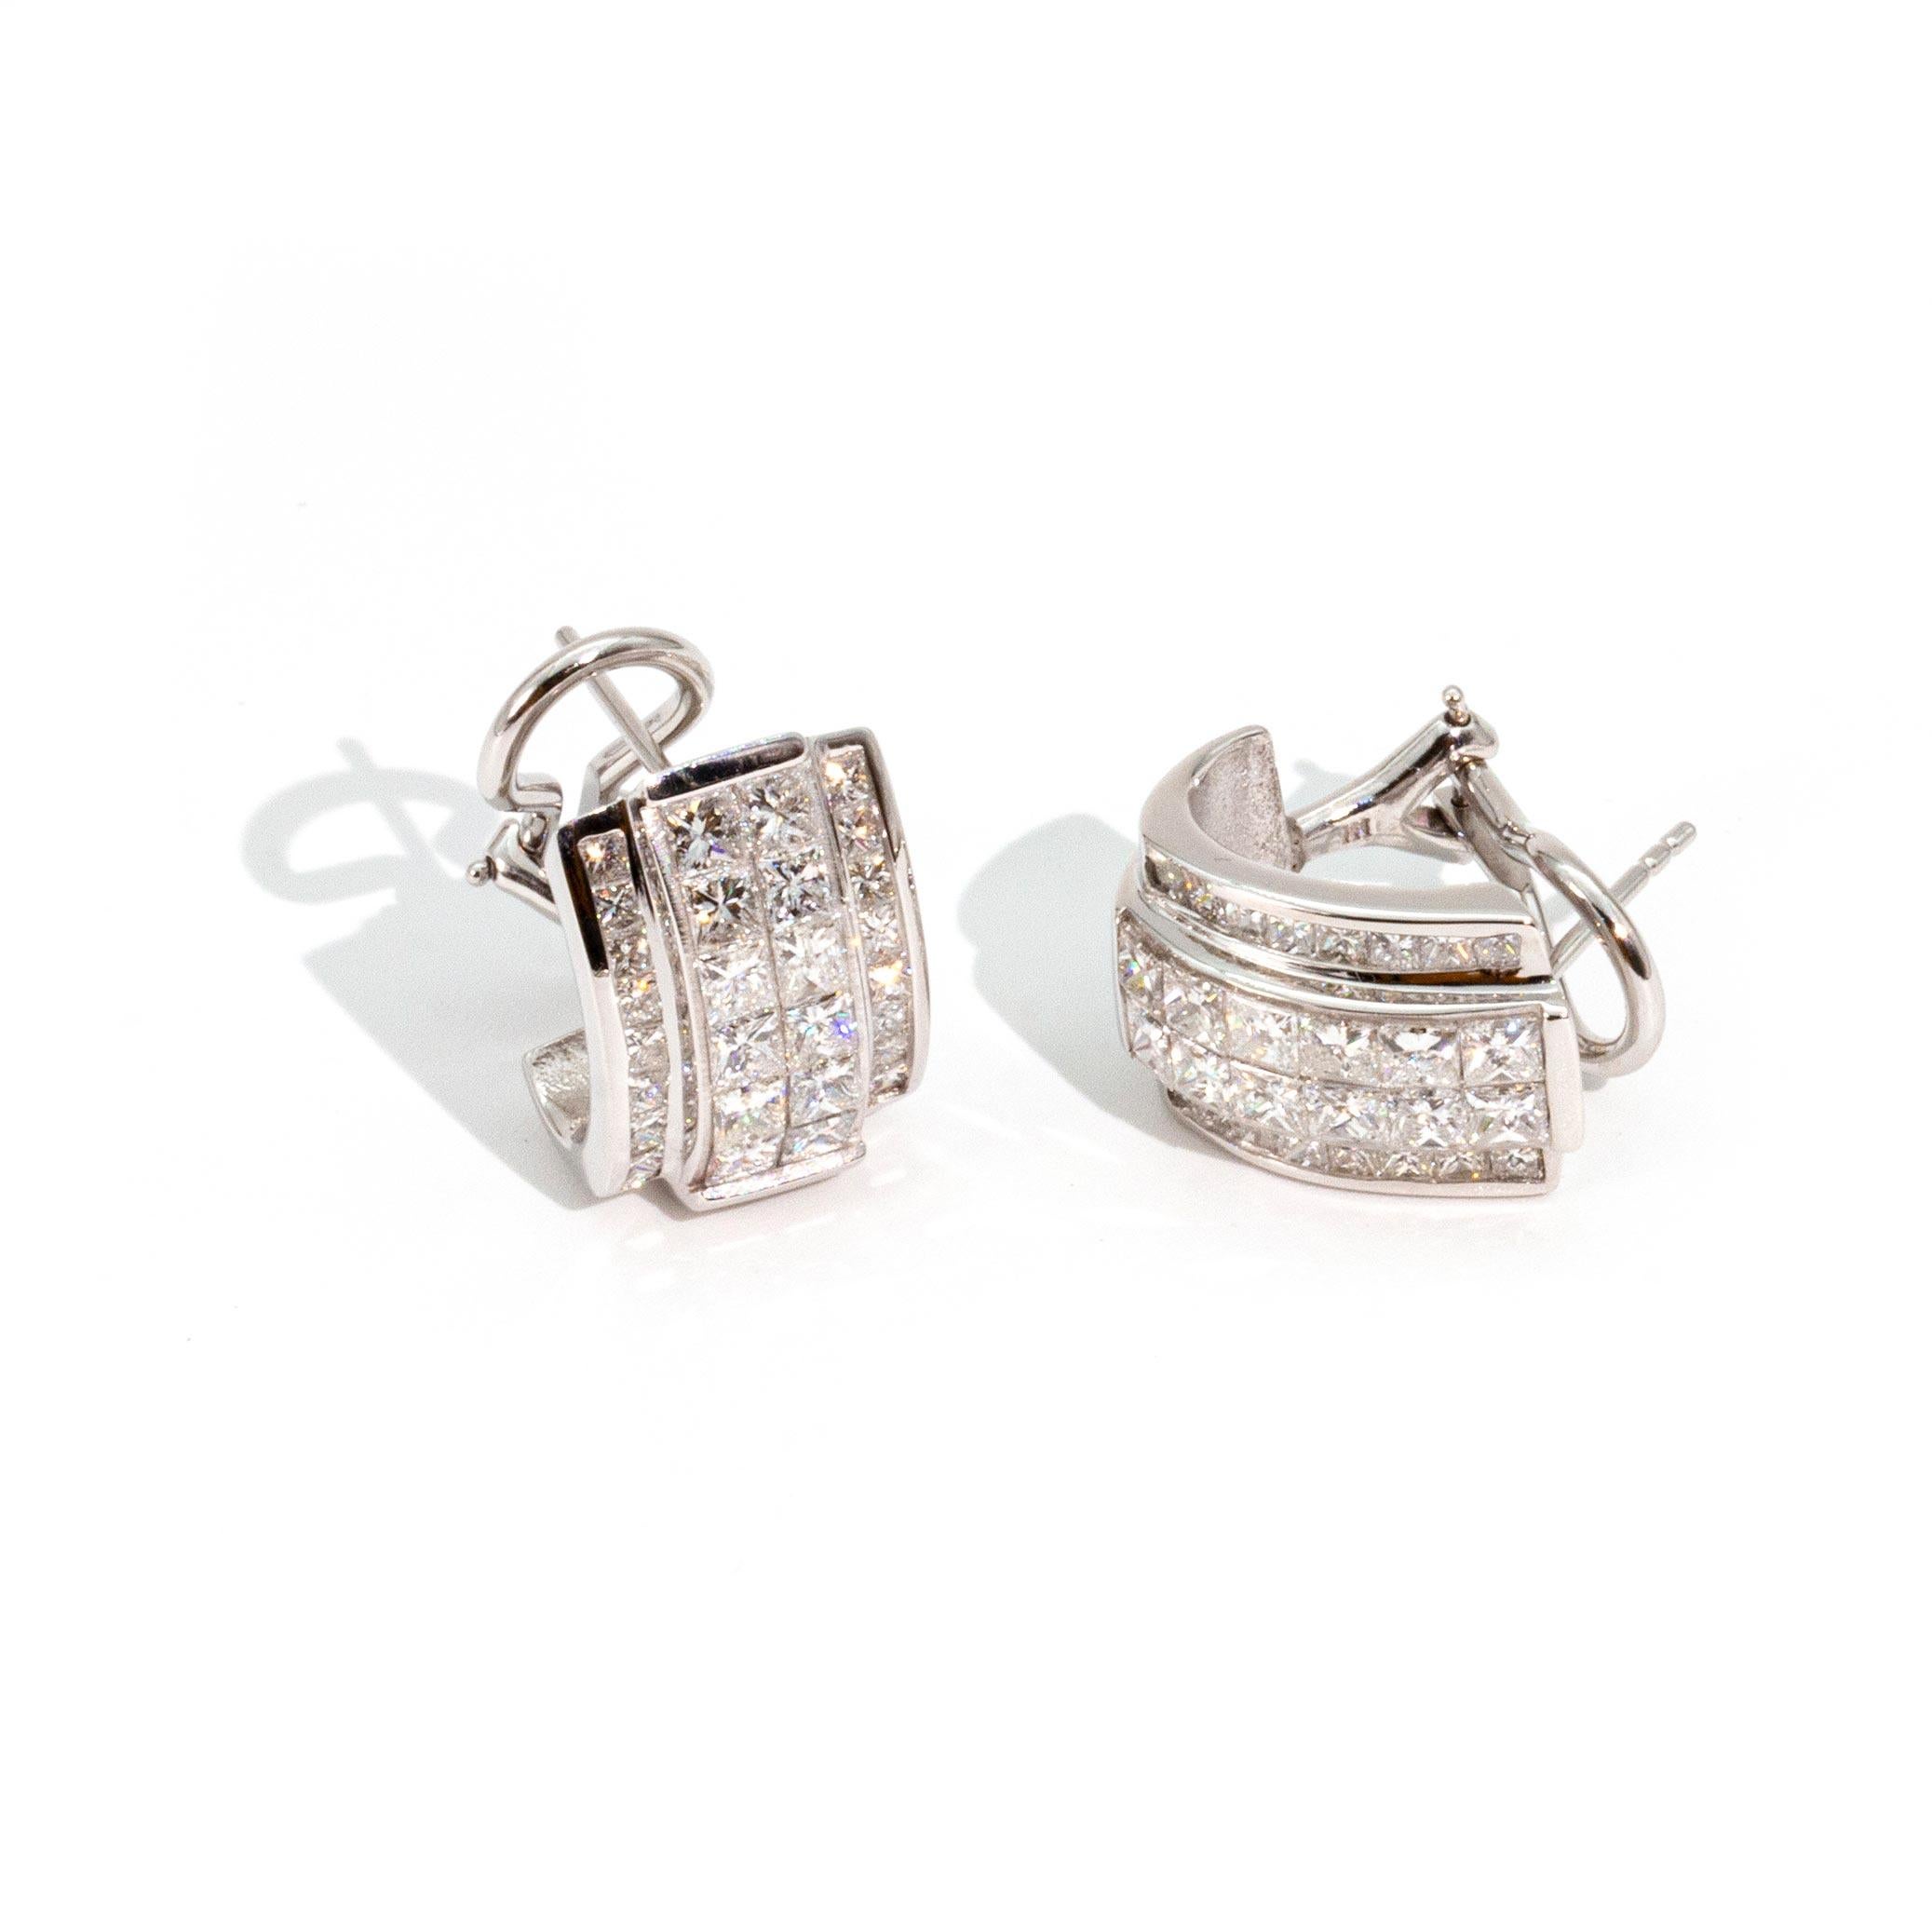 These ultimate and extremely versatile Art Deco Style Diamond and 14 Carat White Gold Earrings have both style and substance. With the appearance of a clip on earring, this design is timeless in that it could be 80s/90s style also. 

Casual enough